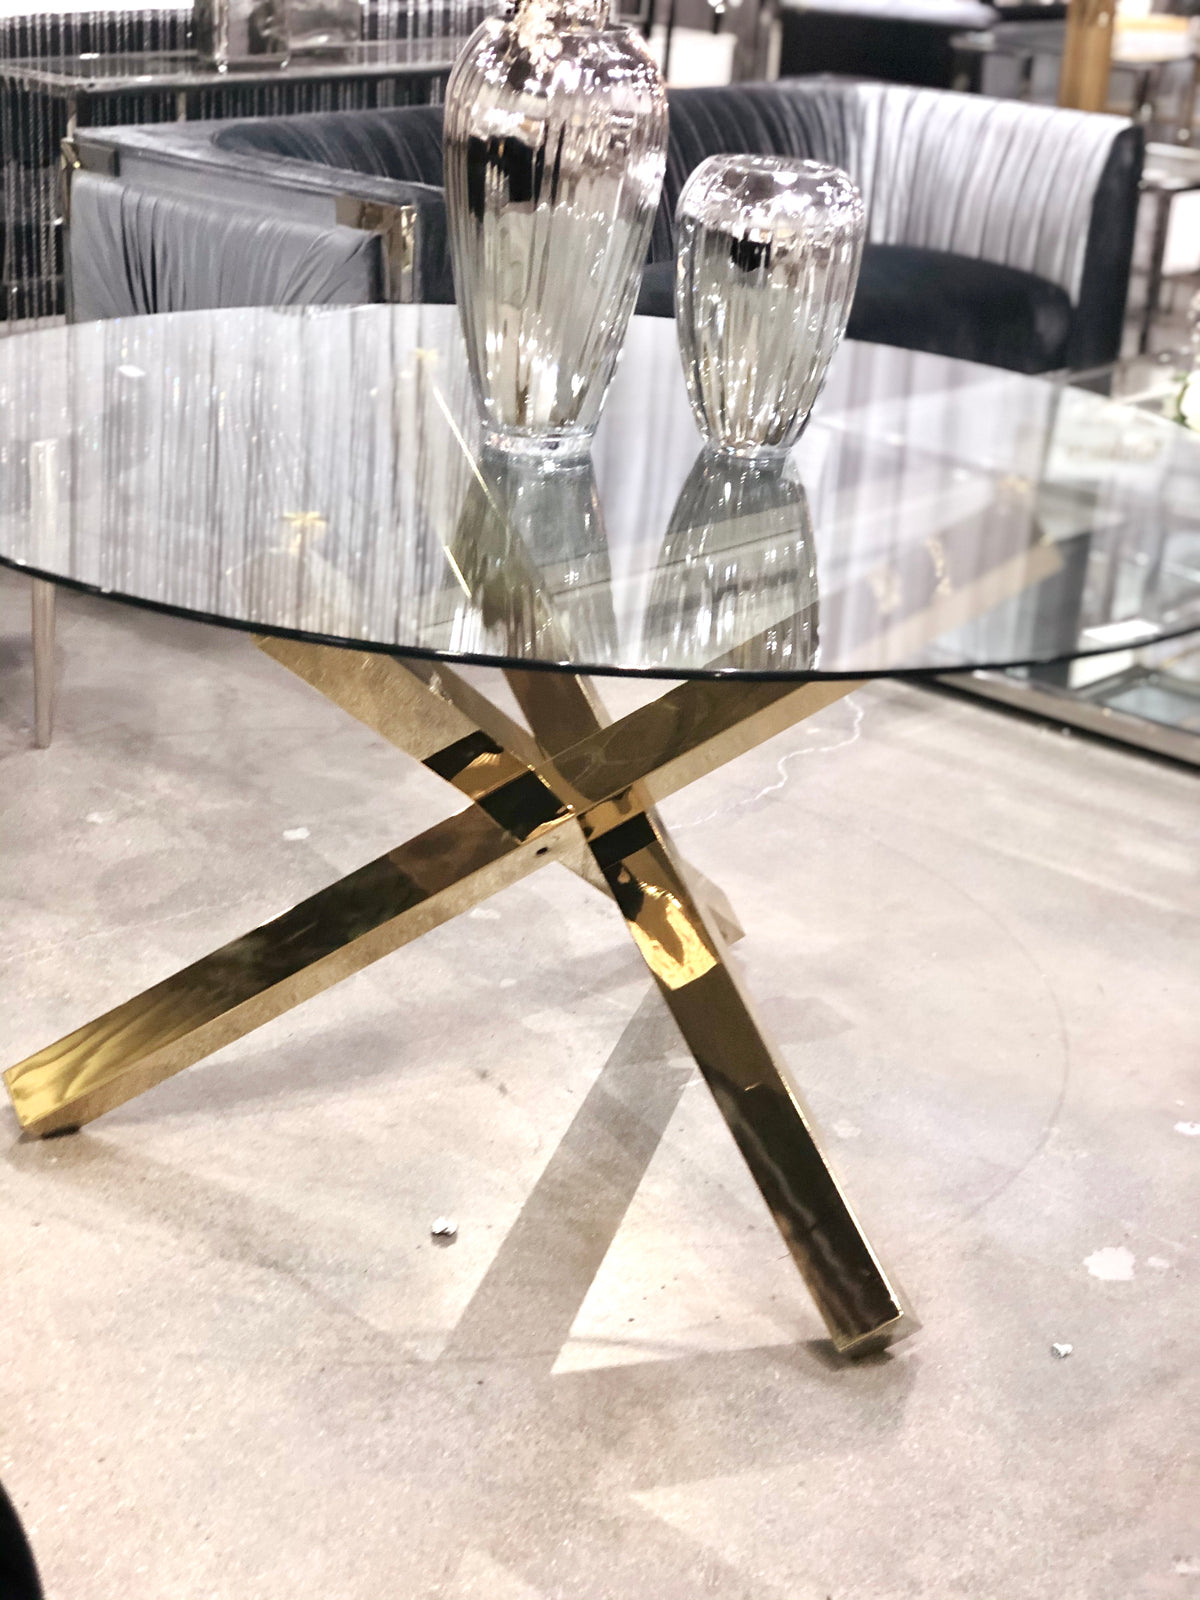 Rodeo Gold Dining Table